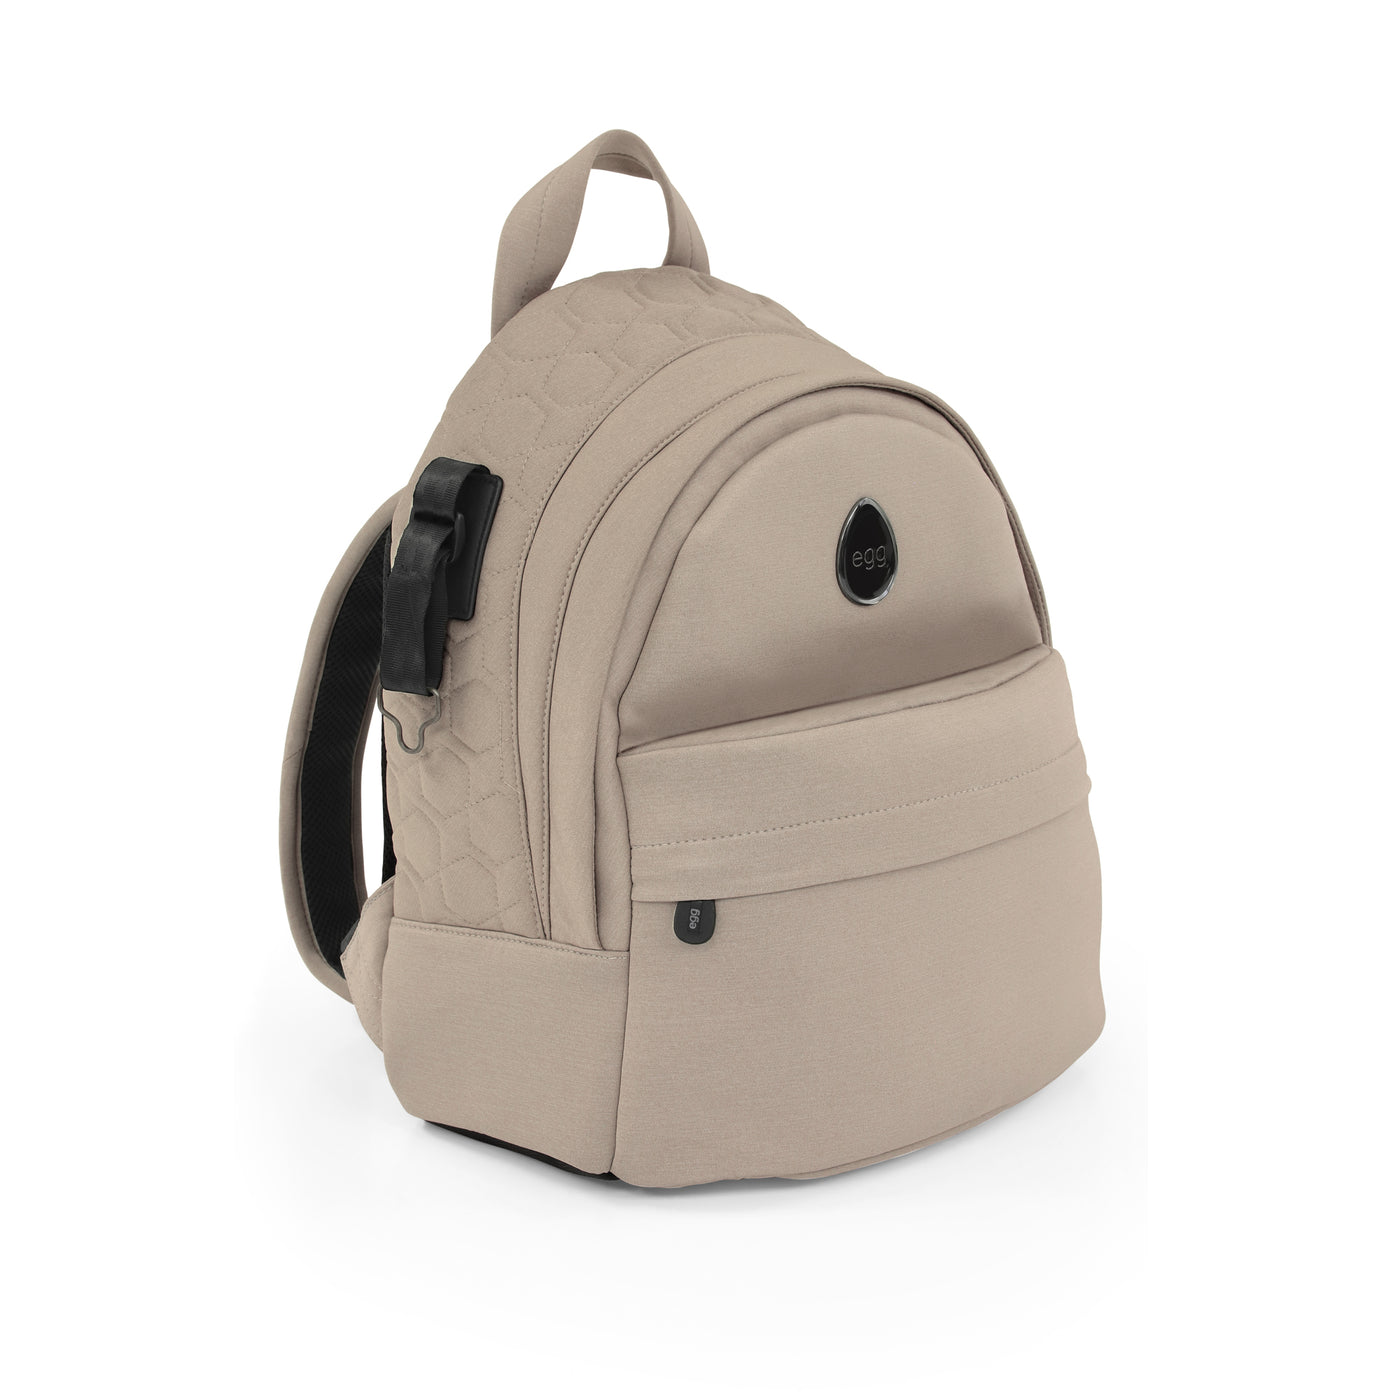 egg2 Backpack - Feather